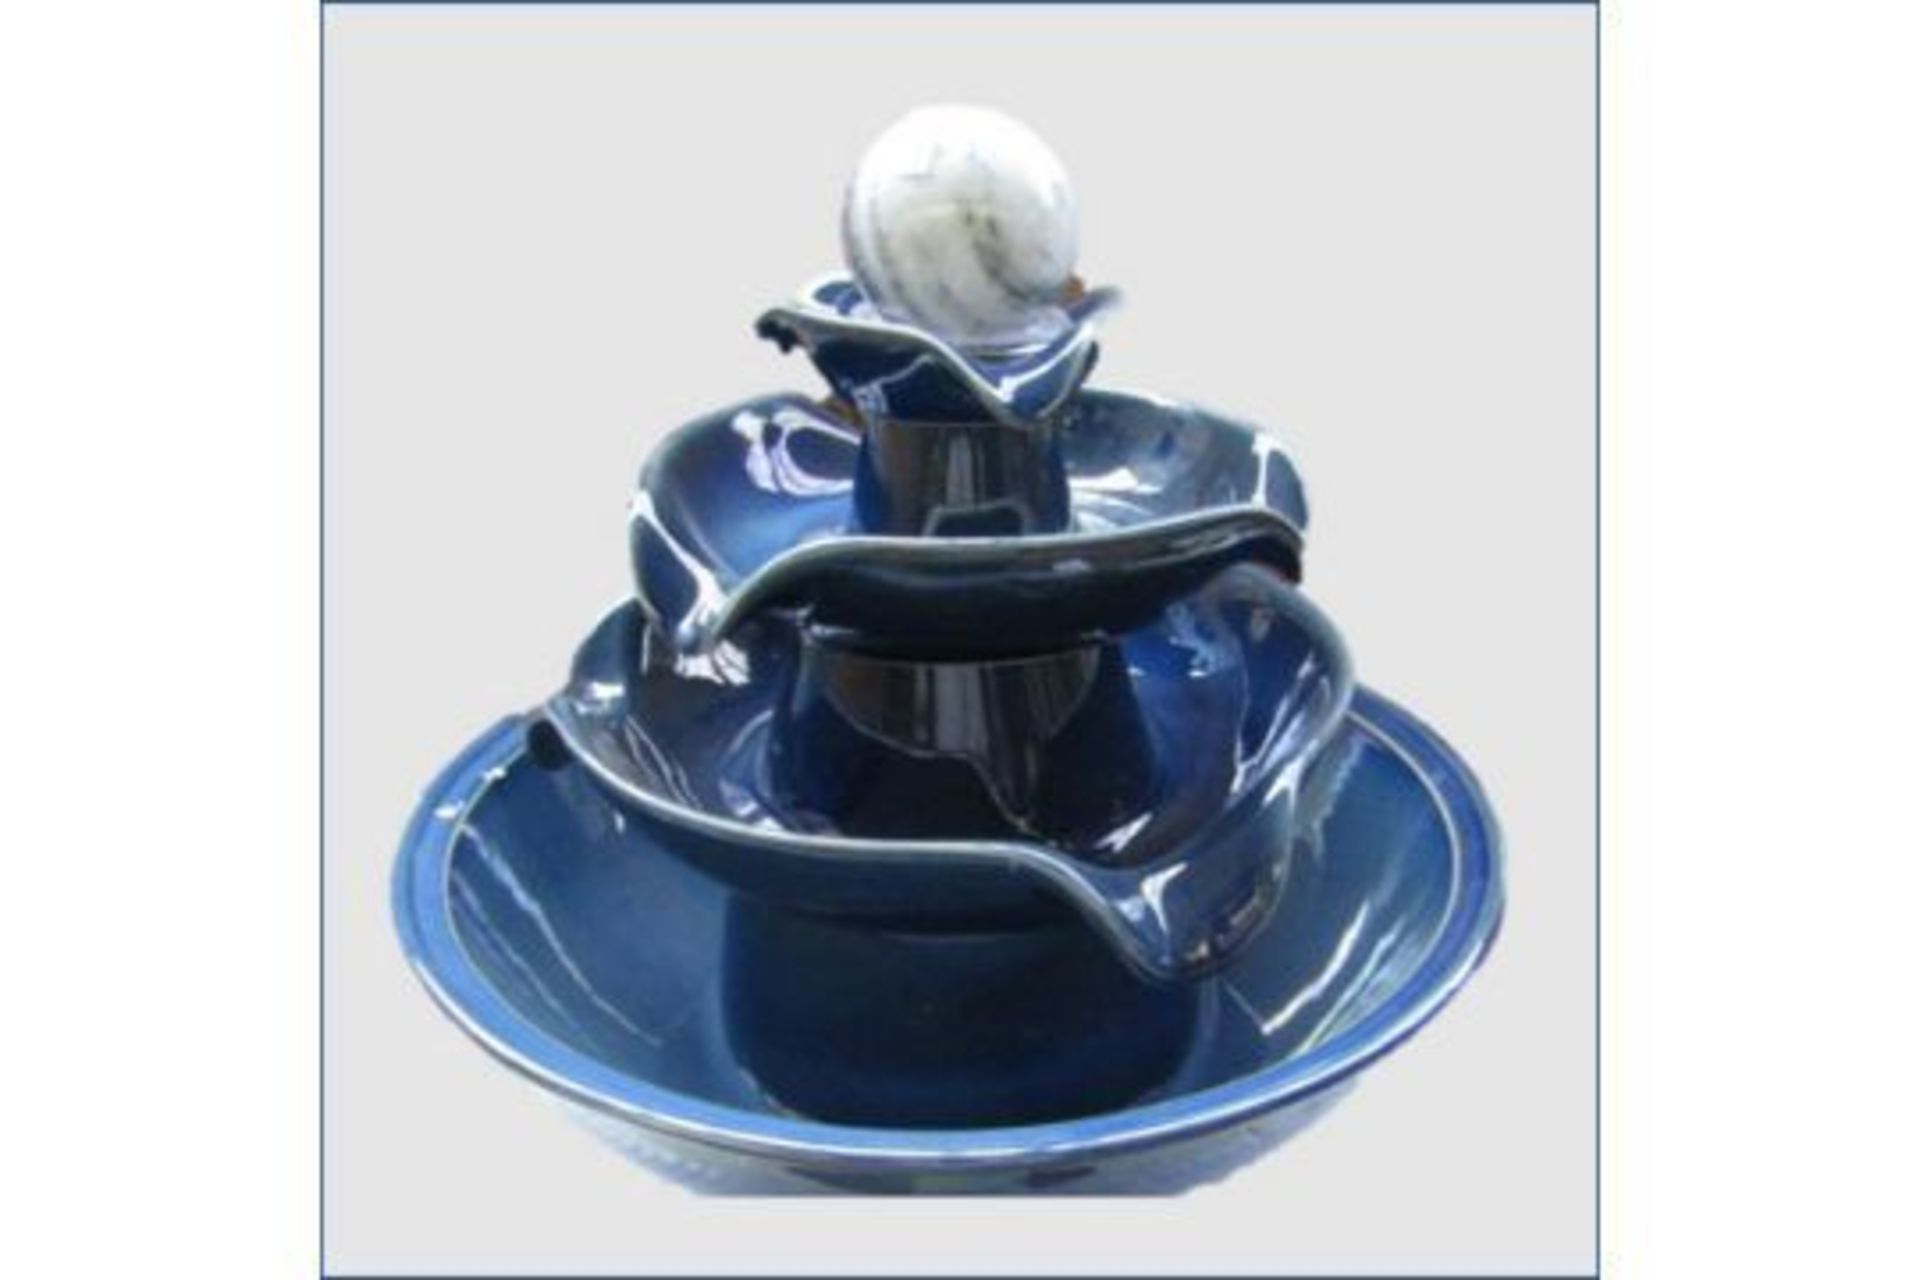 New 3 Tier Electric Blue Ceramic Water Fountain - RRP £39.99.